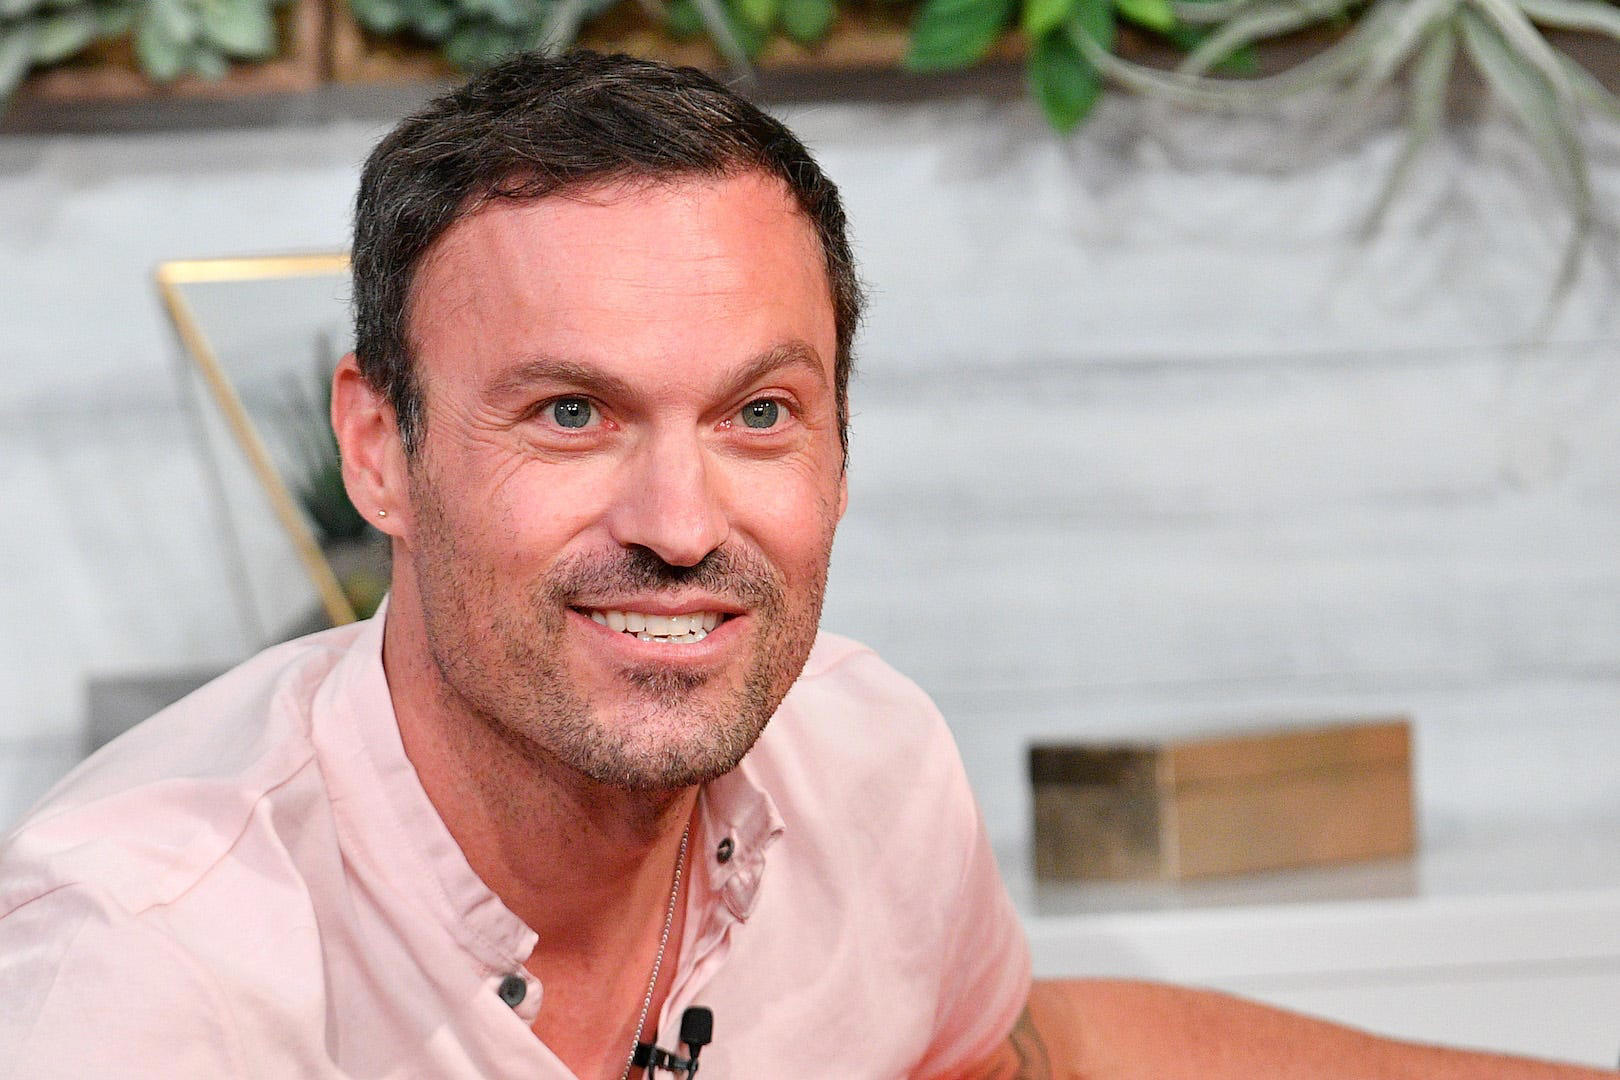 Brian Austin Green breaks silence on death of friend and costar Luke Perry